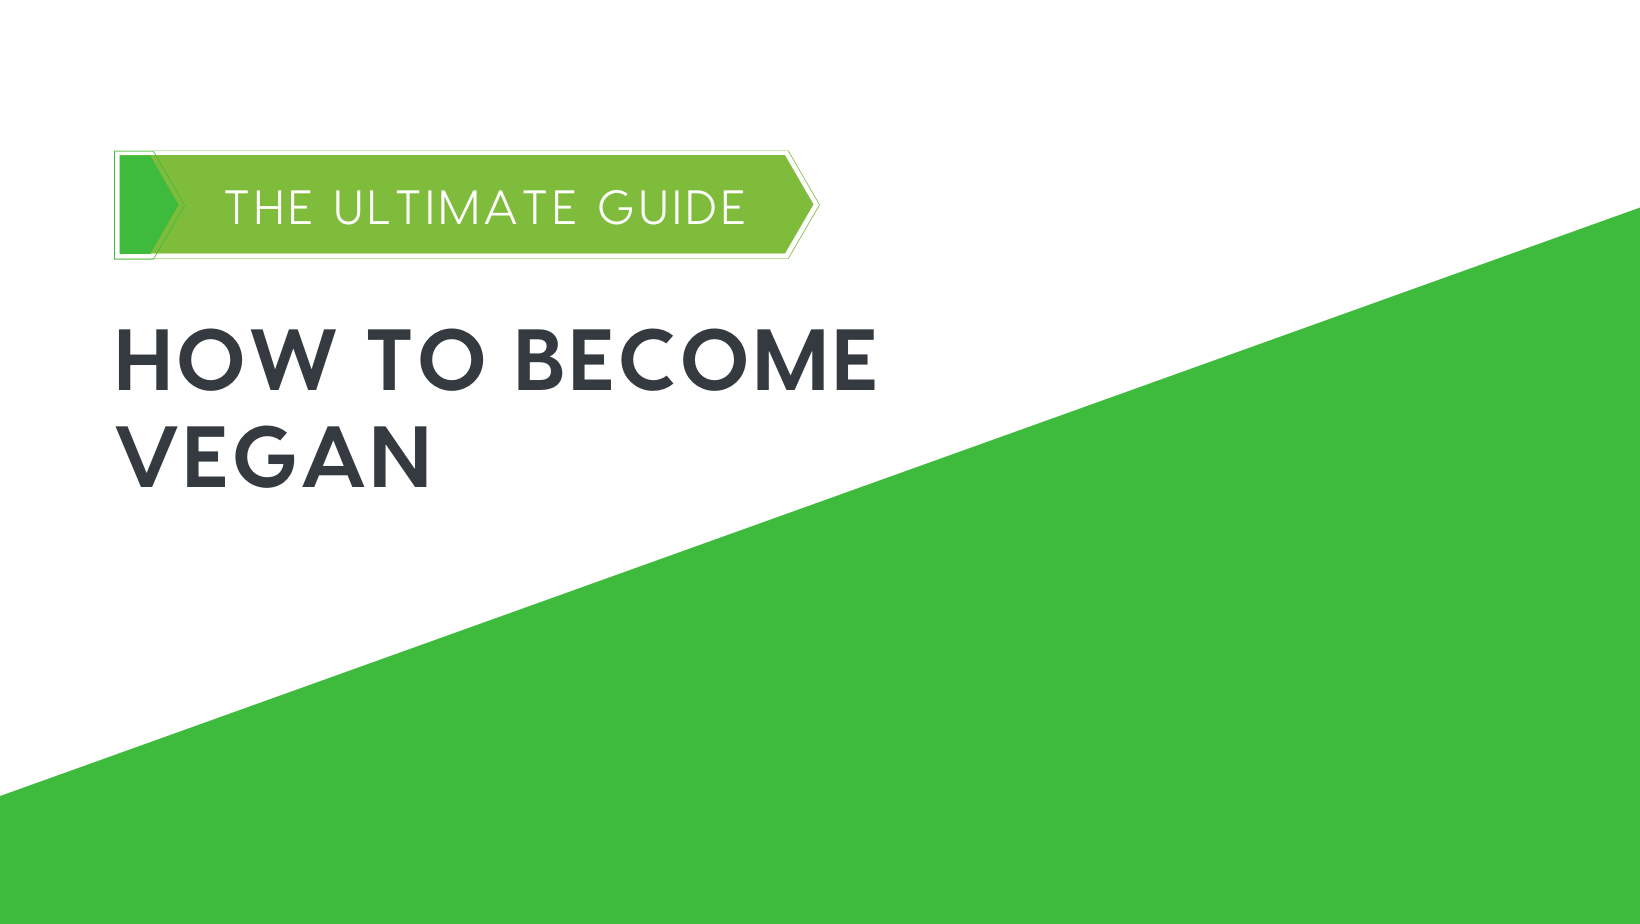 The ultimate guide to become vegan